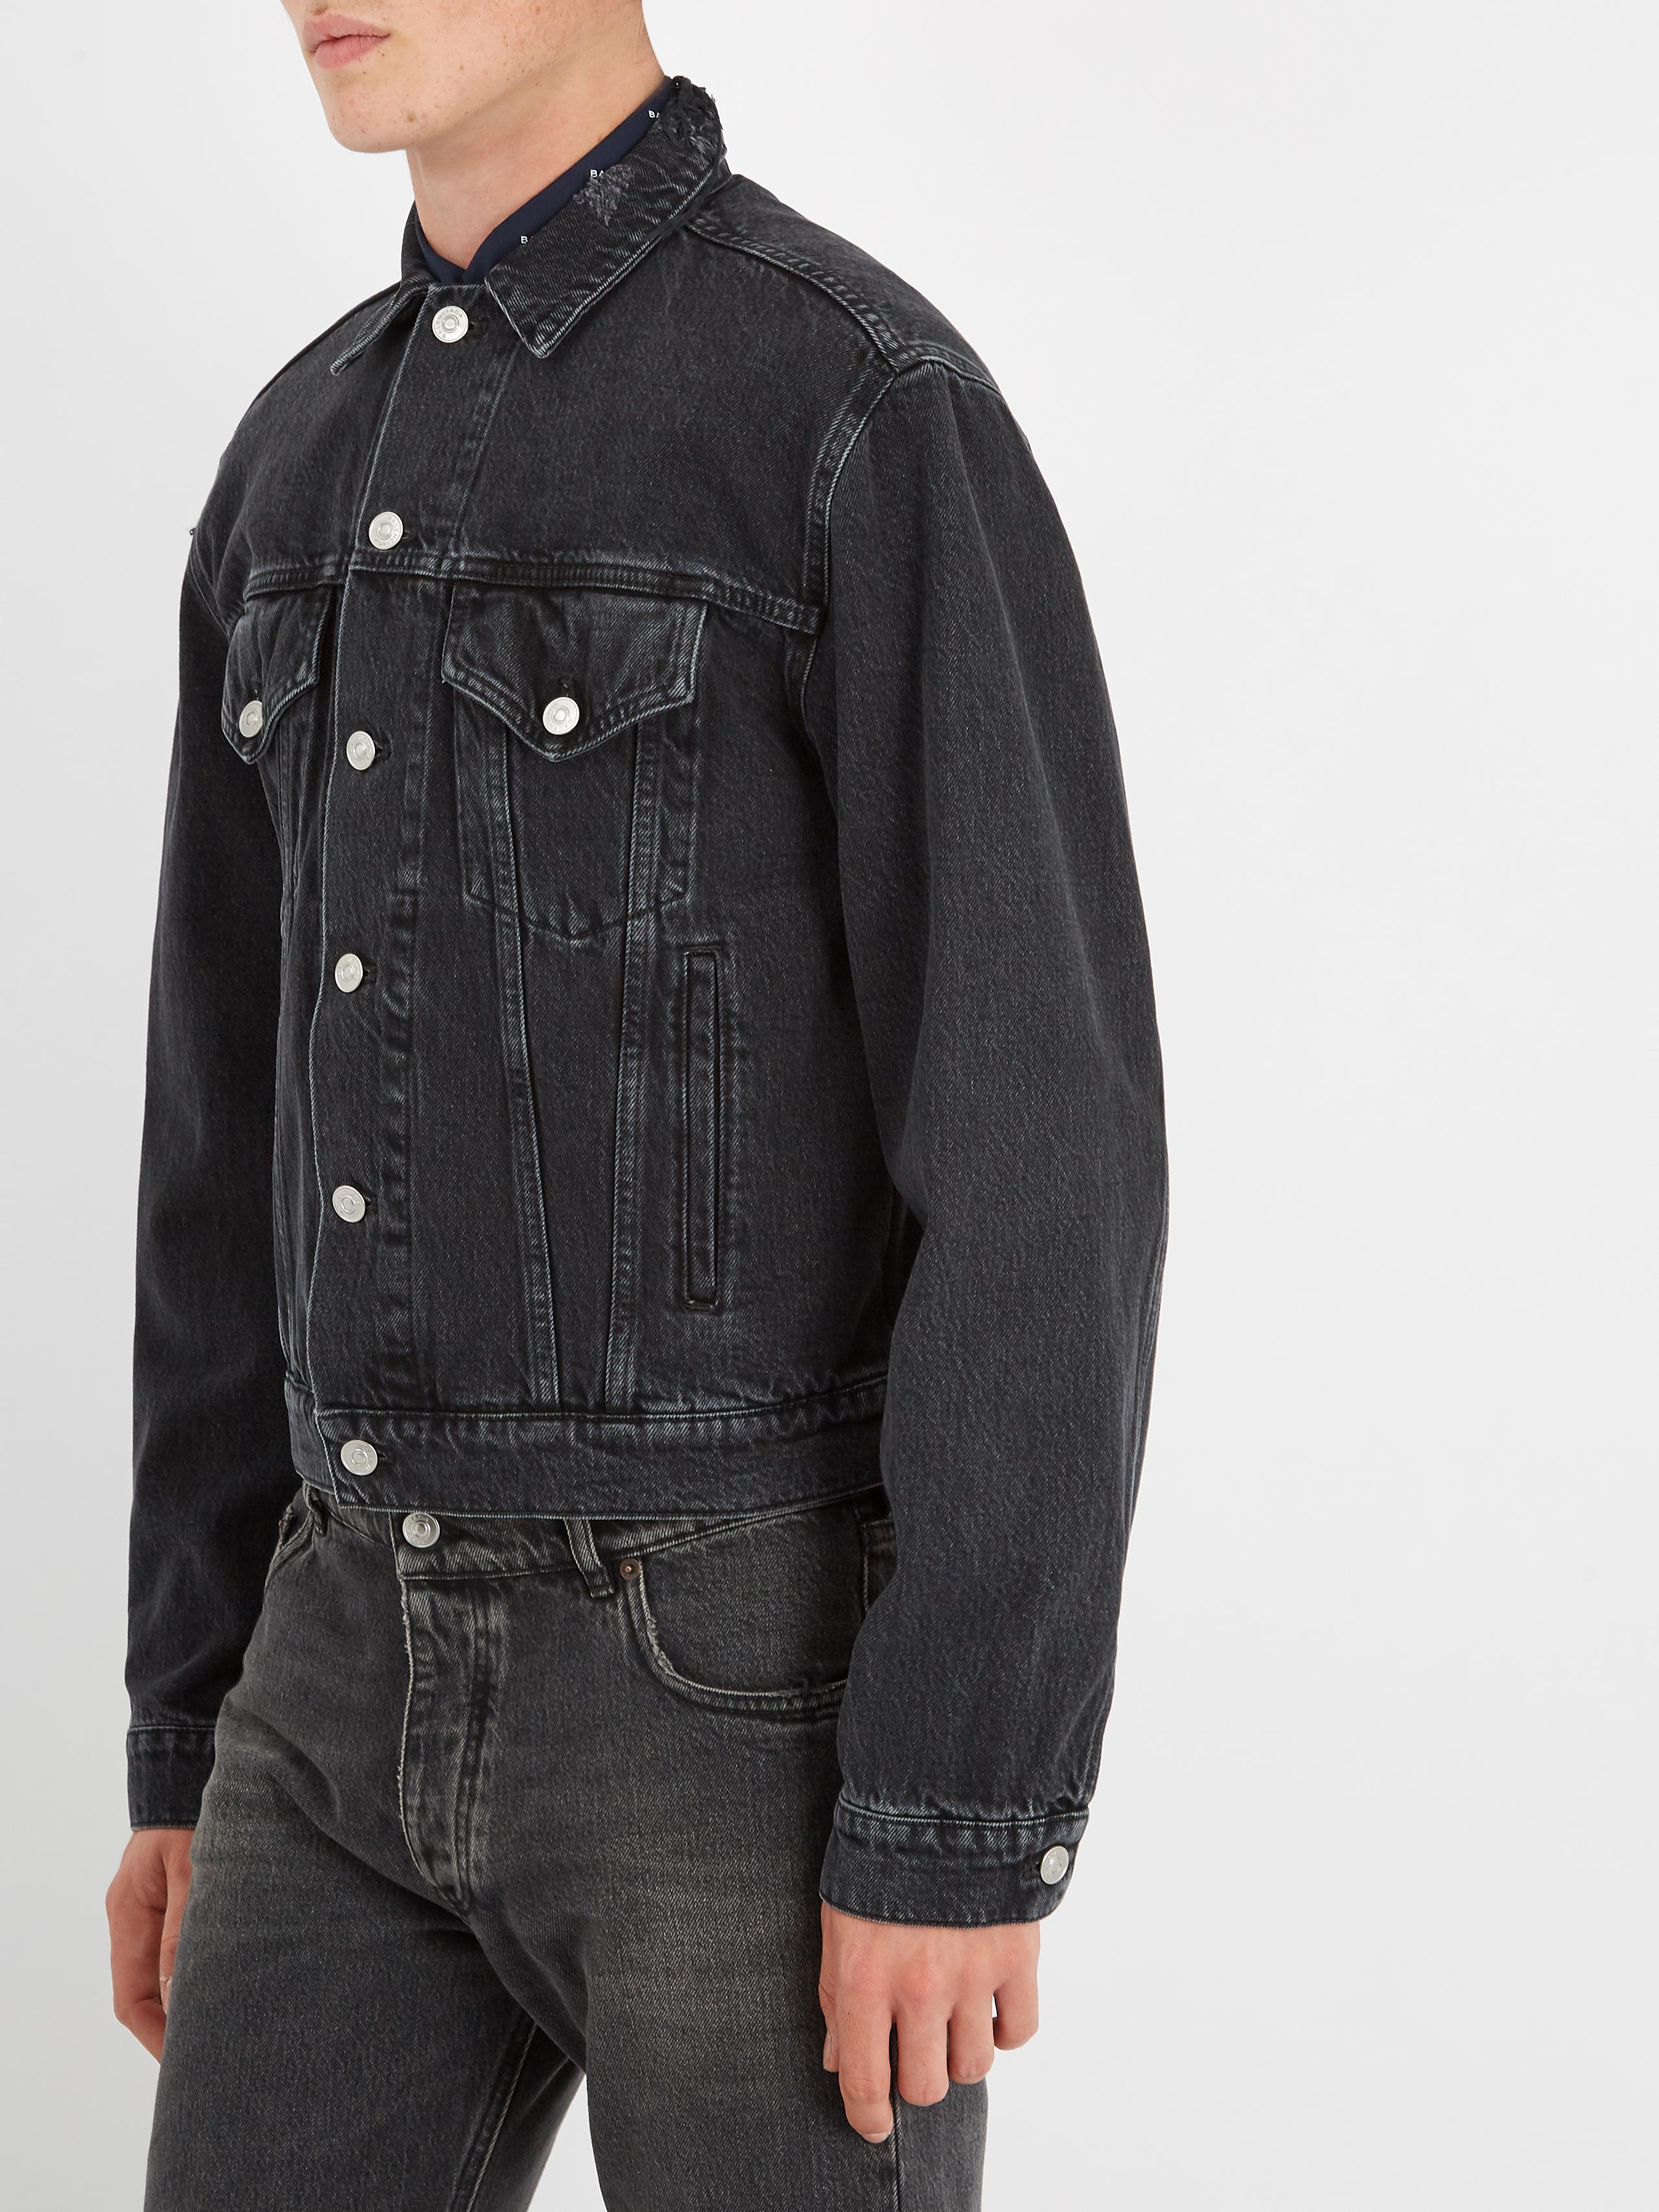 Balenciaga Sinners-embroidered Denim Jacket in Gray for Men - Lyst